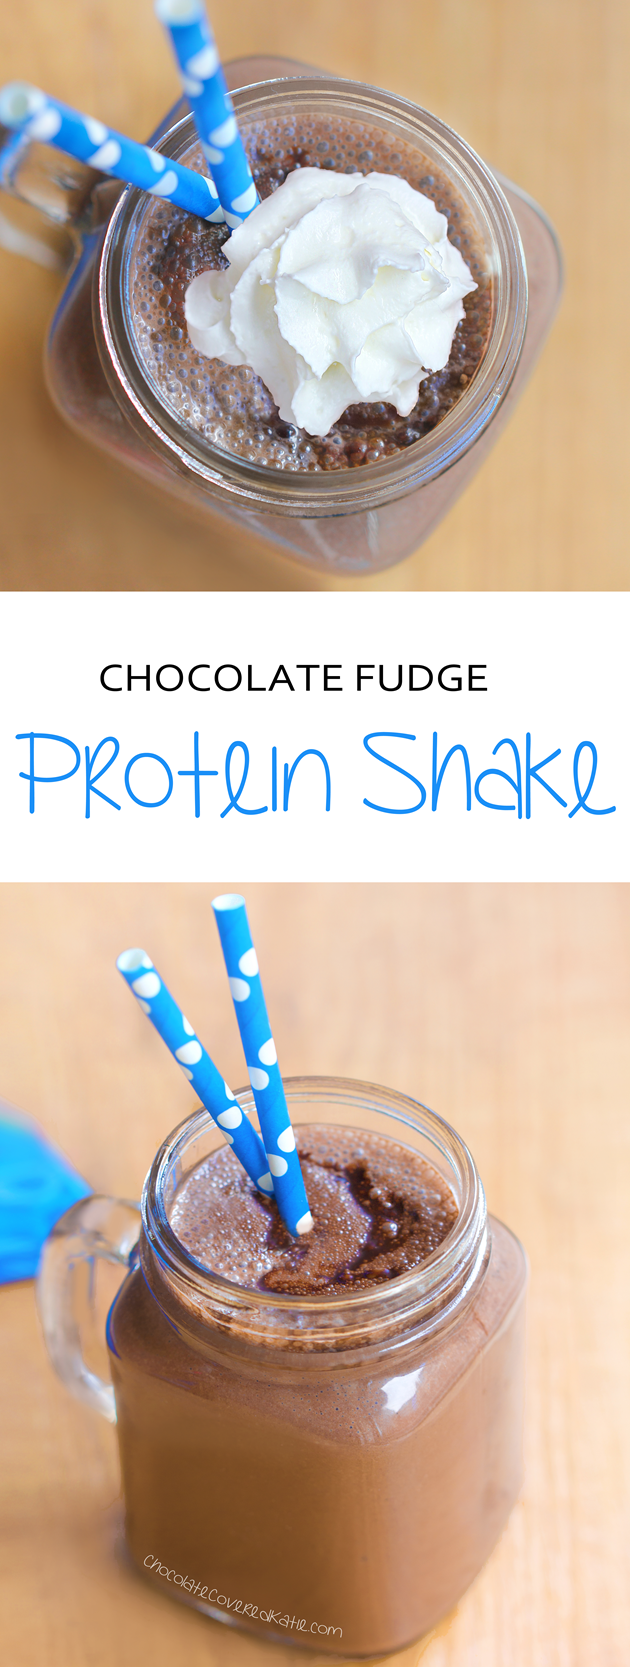 CHOCOLATE FUDGE PROTEIN SHAKE - can be soy-free / dairy-free / no sugar added:  http://chocolatecoveredkatie.com/2015/04/20/chocolate-fudge-protein-shake/